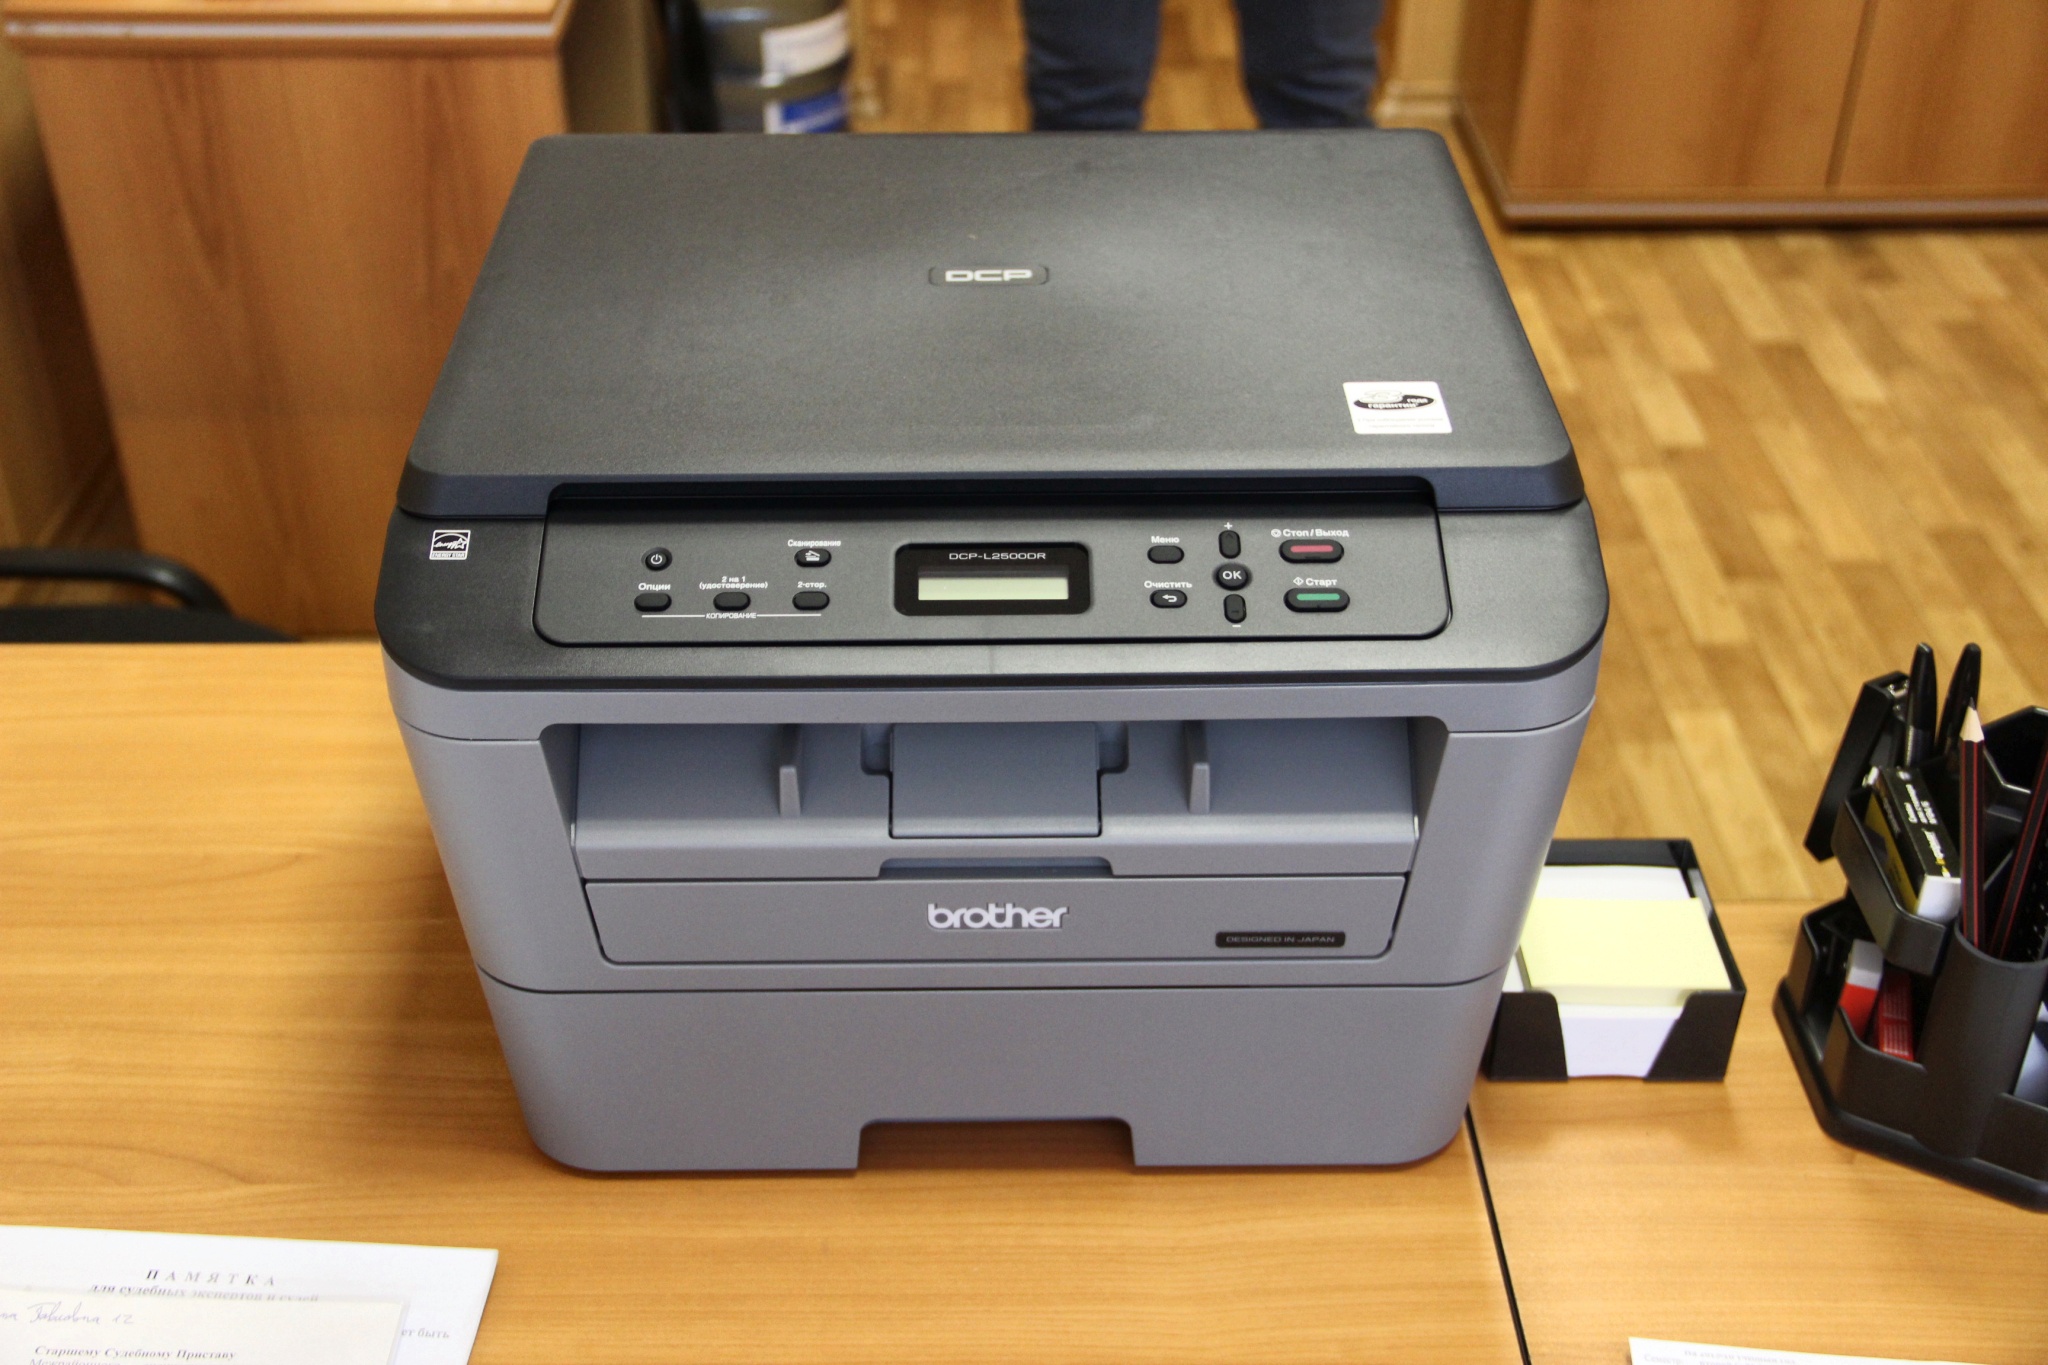 Brother l2500d. Принтер brother DCP l2500dr. МФУ brother DCP-l2500dr. Принтер бротхер DCP-l2500dr. Brother DCP 2500dr.